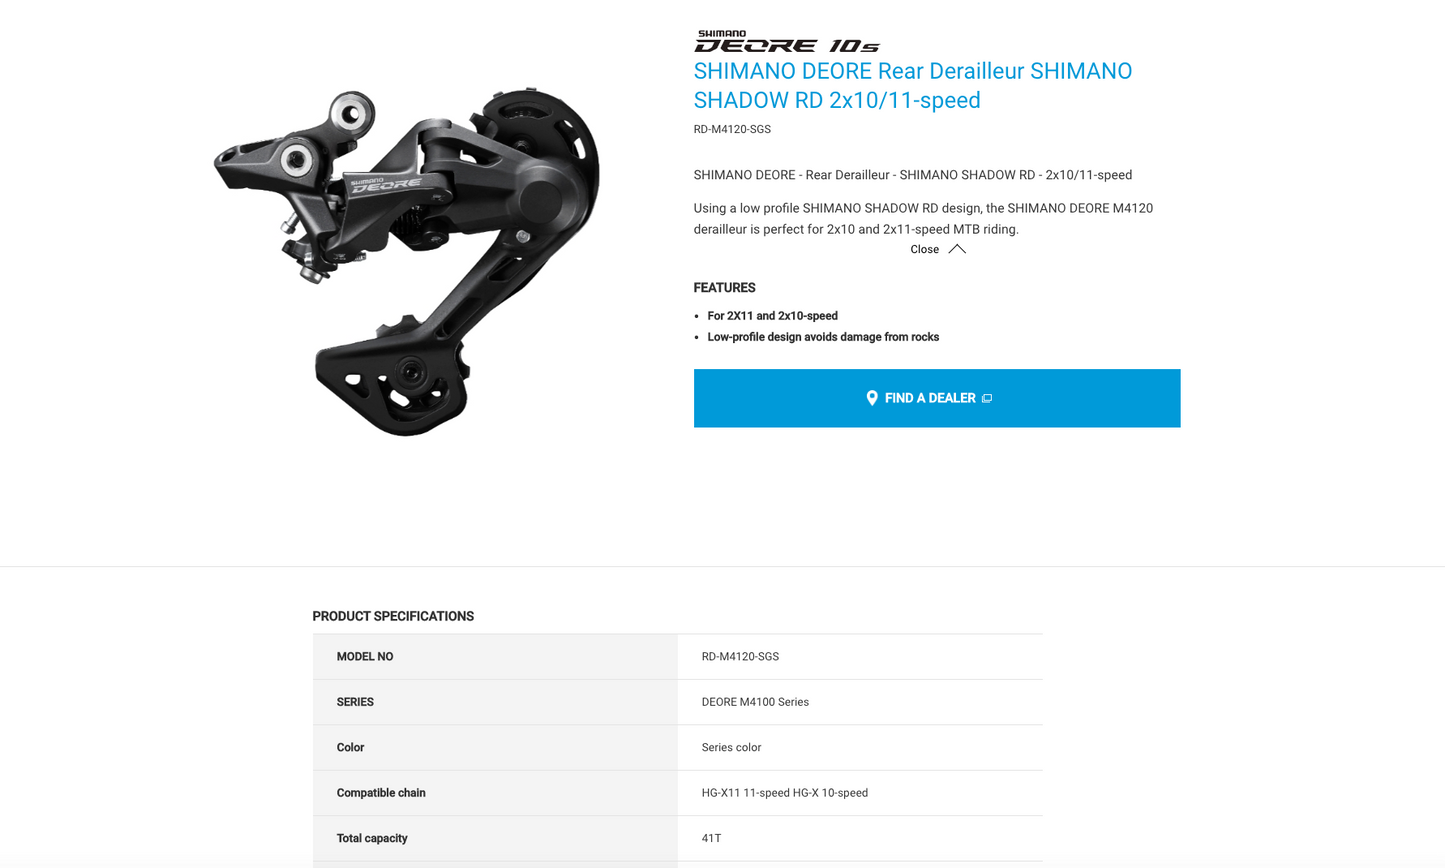 JGbike Compatible 10 Speed MTB 4pc groupset for Shimano Deore M4100: Right Shift Lever,Long cage Rear Derailleur, 11-42T Cassette or 11-46T Cassette, KMC X10 Chain